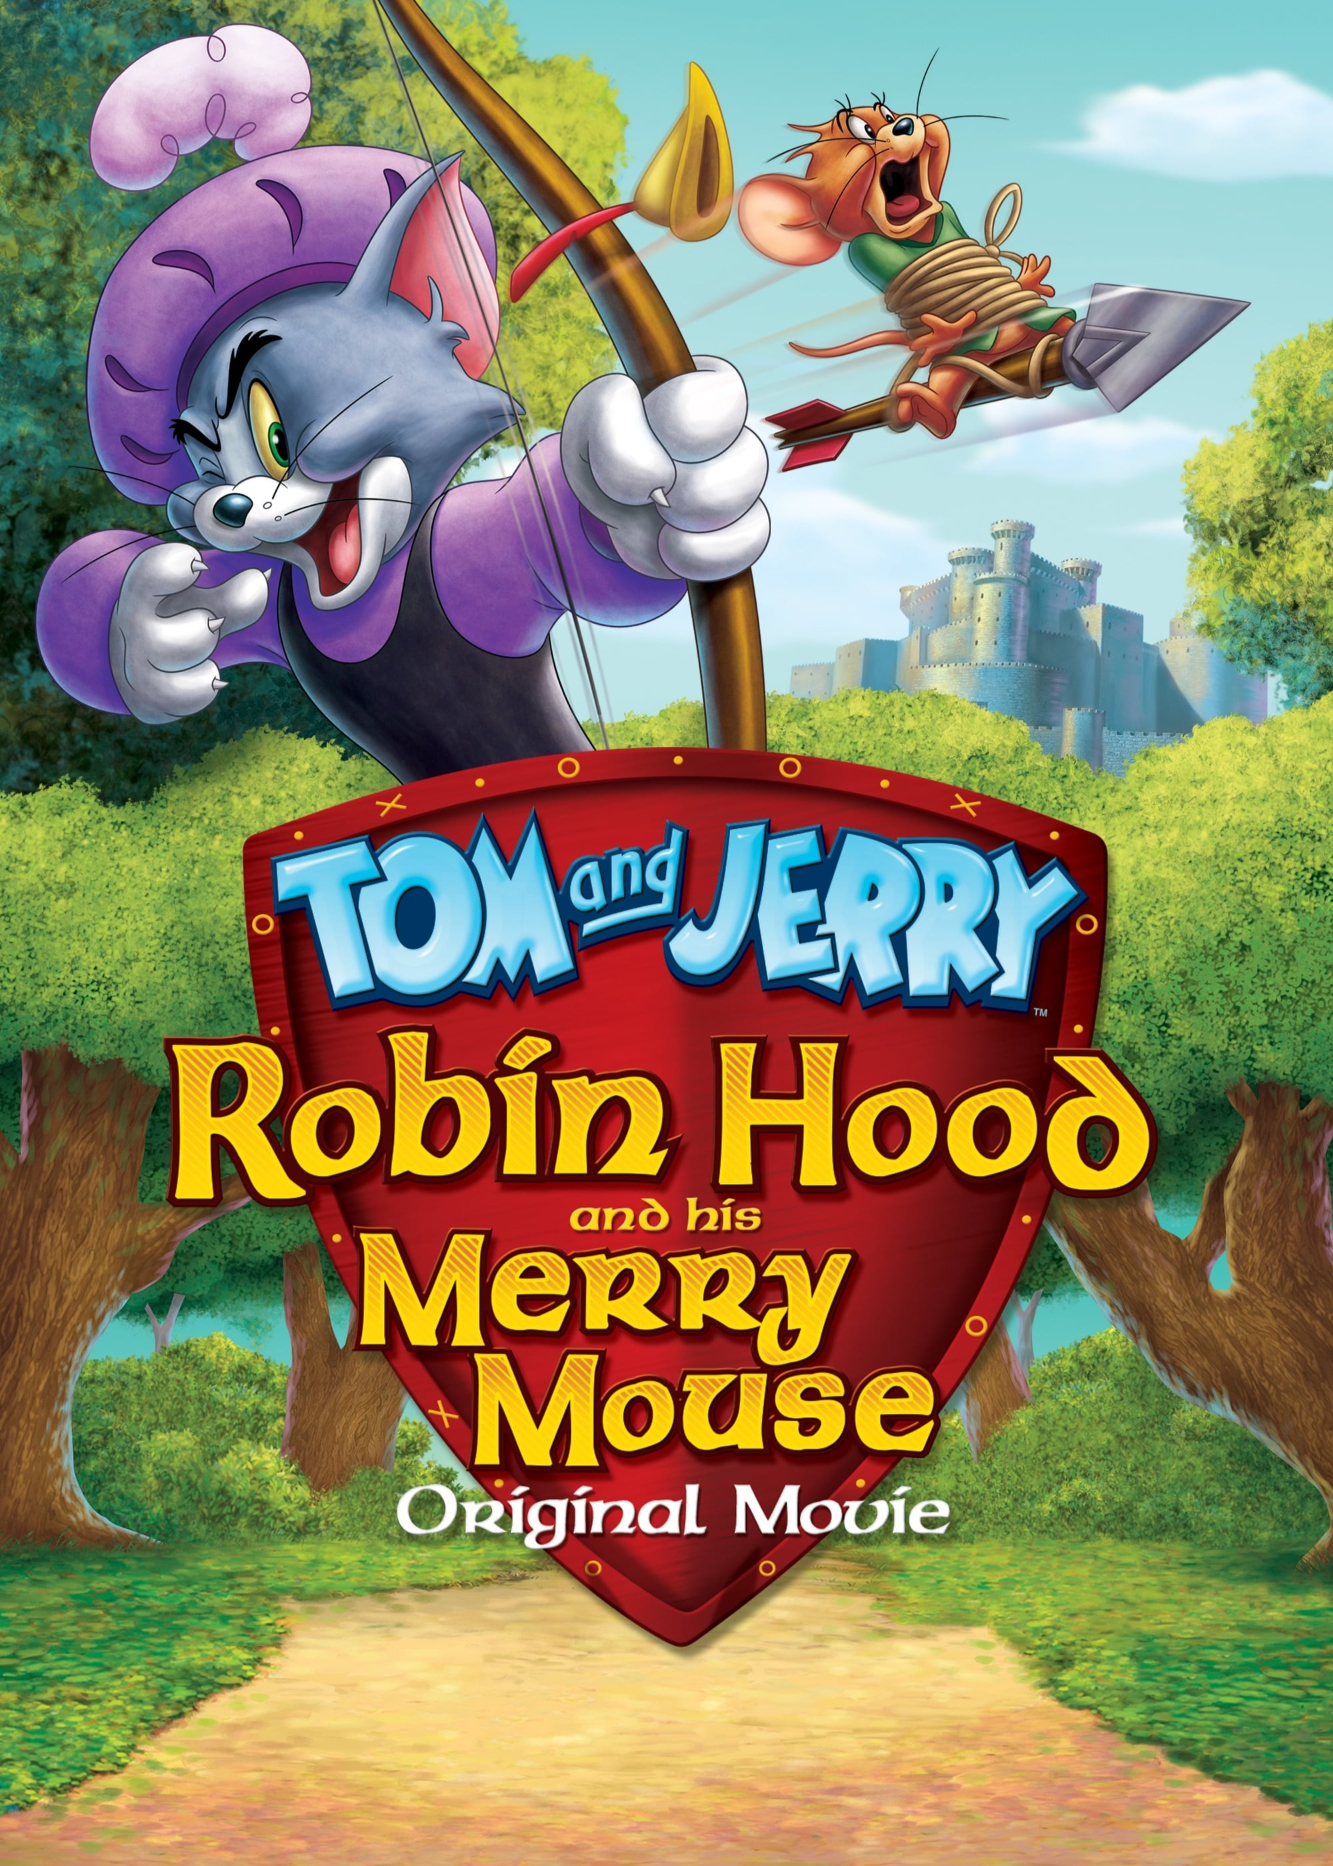 Poster Phim Tom and Jerry: Robin Hood and His Merry Mouse (Tom and Jerry: Robin Hood and His Merry Mouse)